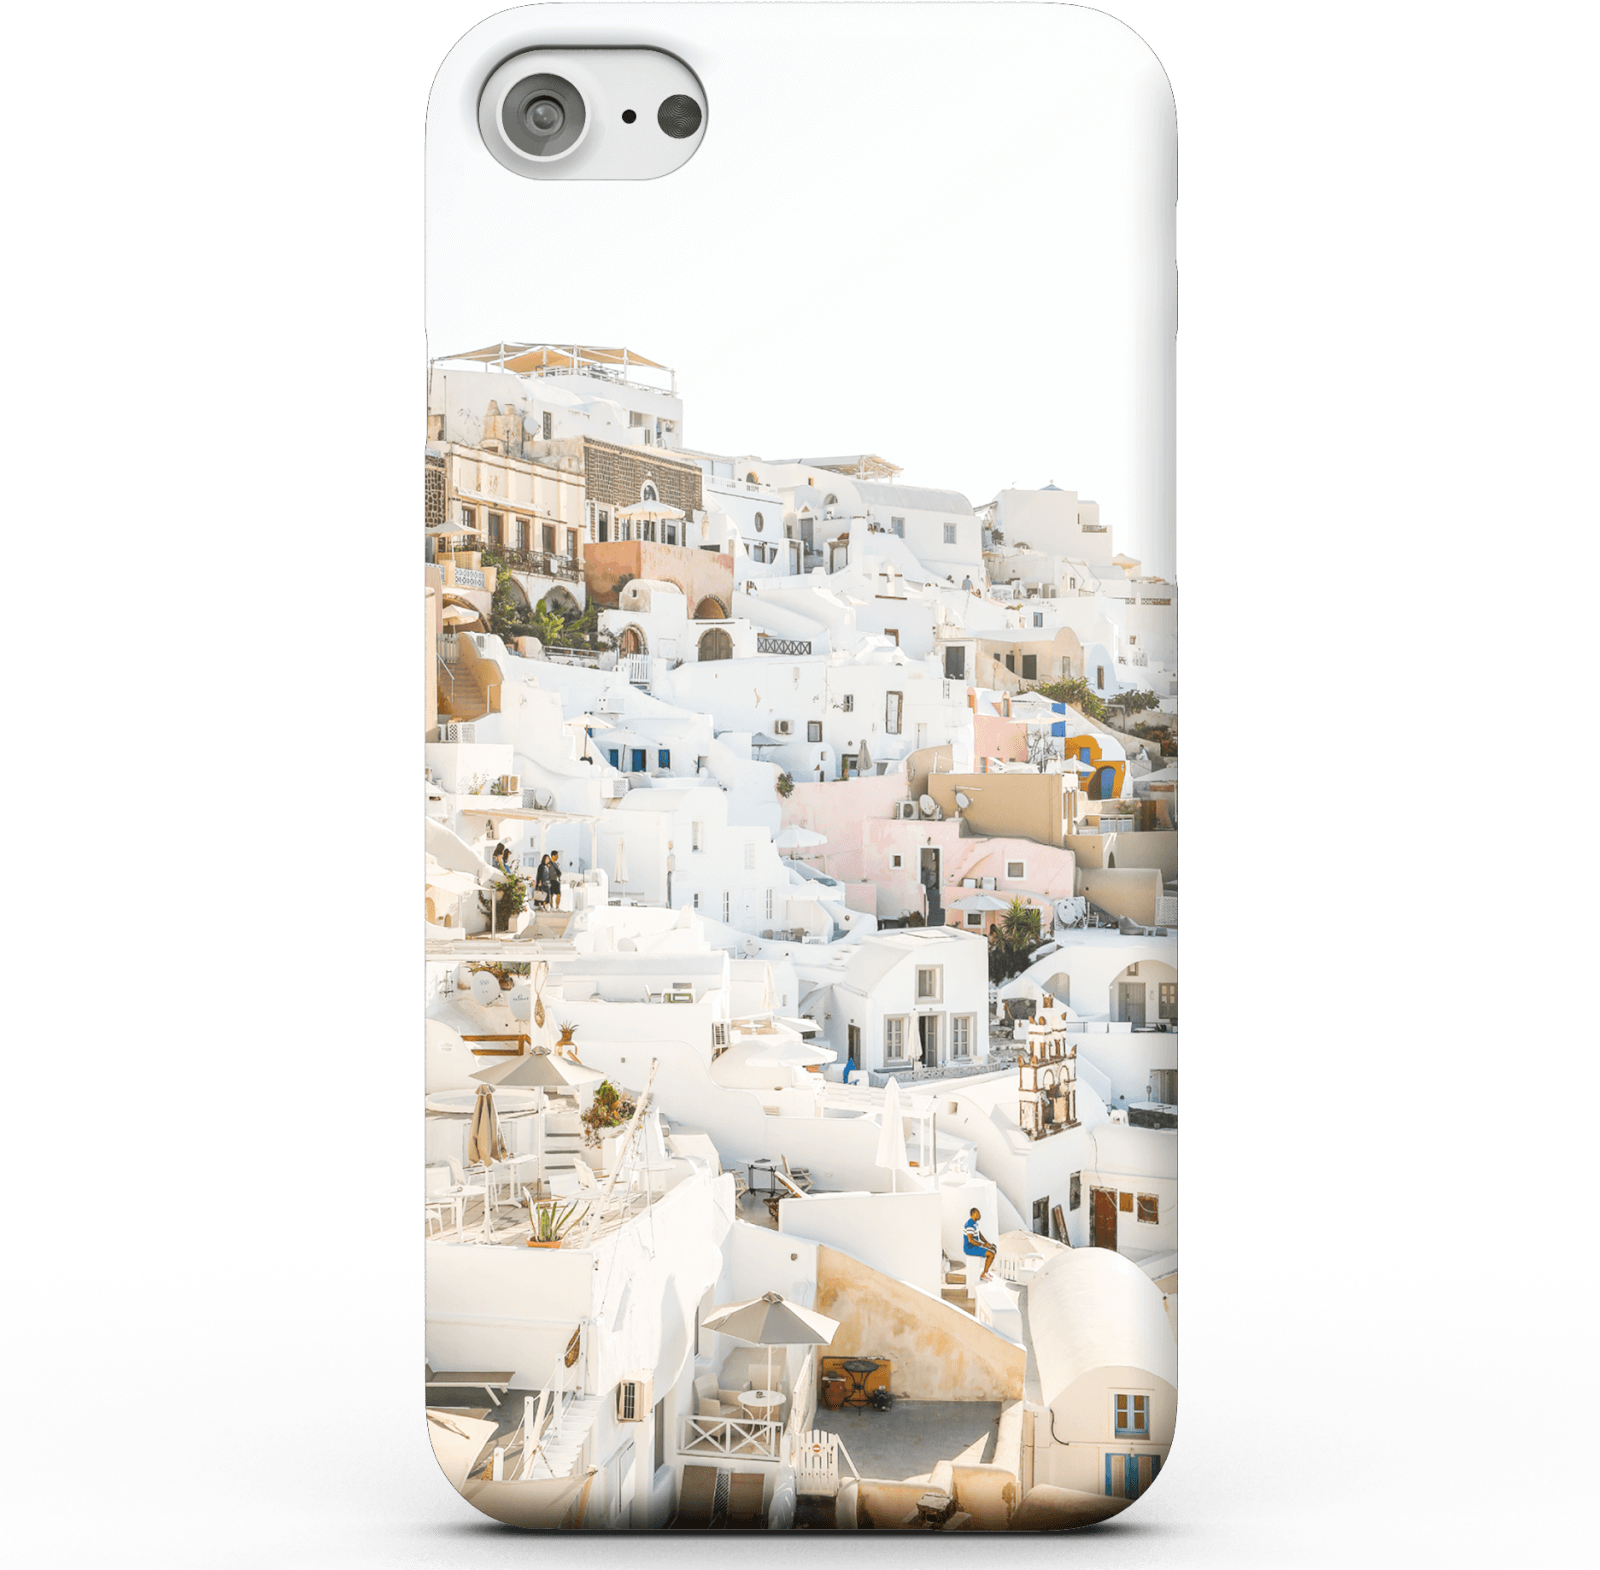 Santorini Town Phone Case for iPhone and Android - iPhone 5/5s - Snap Case - Matte